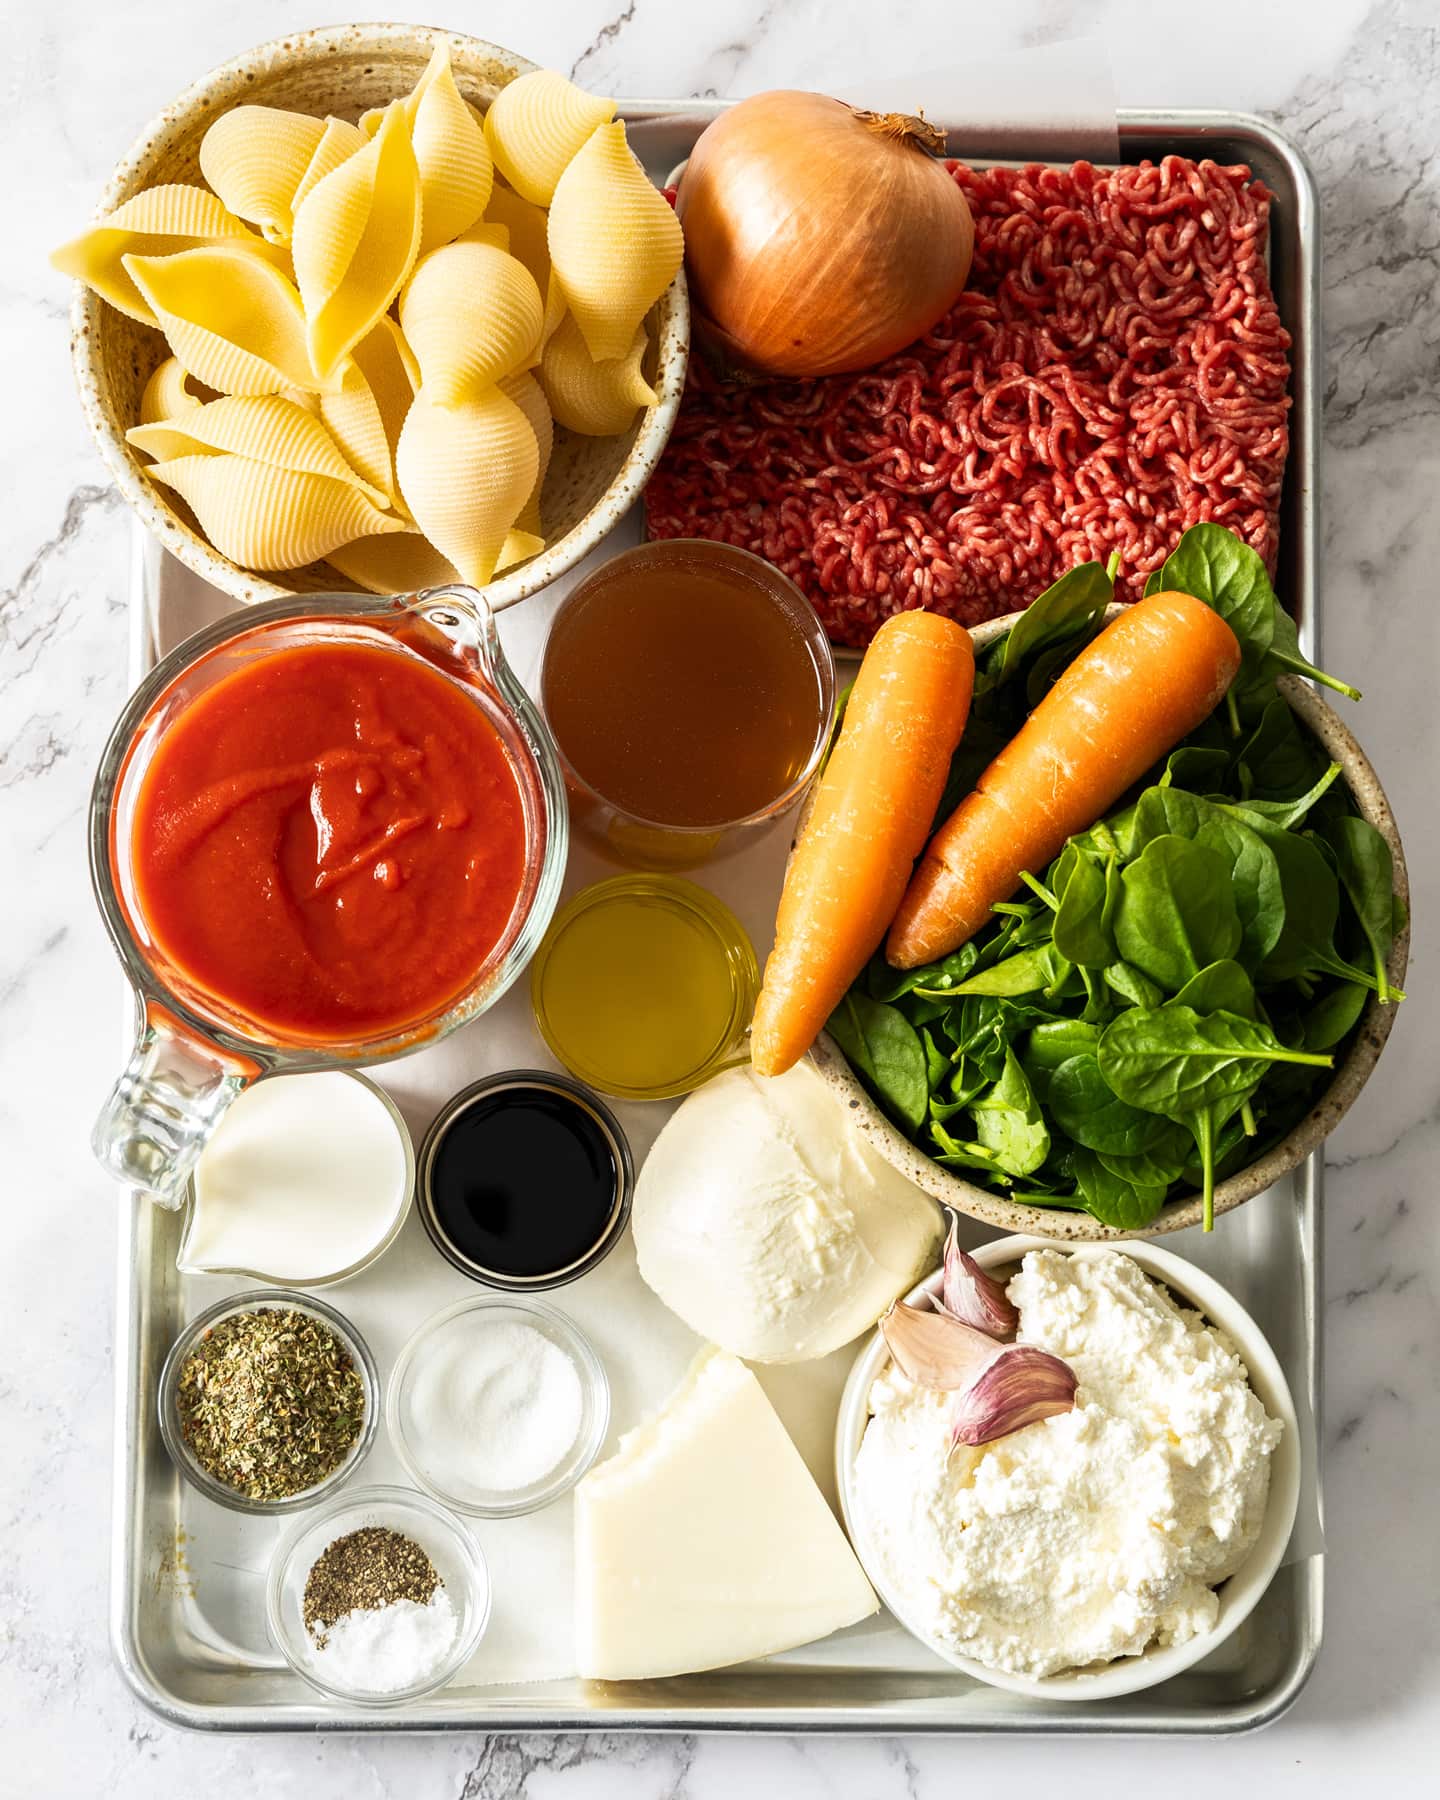 Ingredients for lasagna stuffed shells on a baking tray.